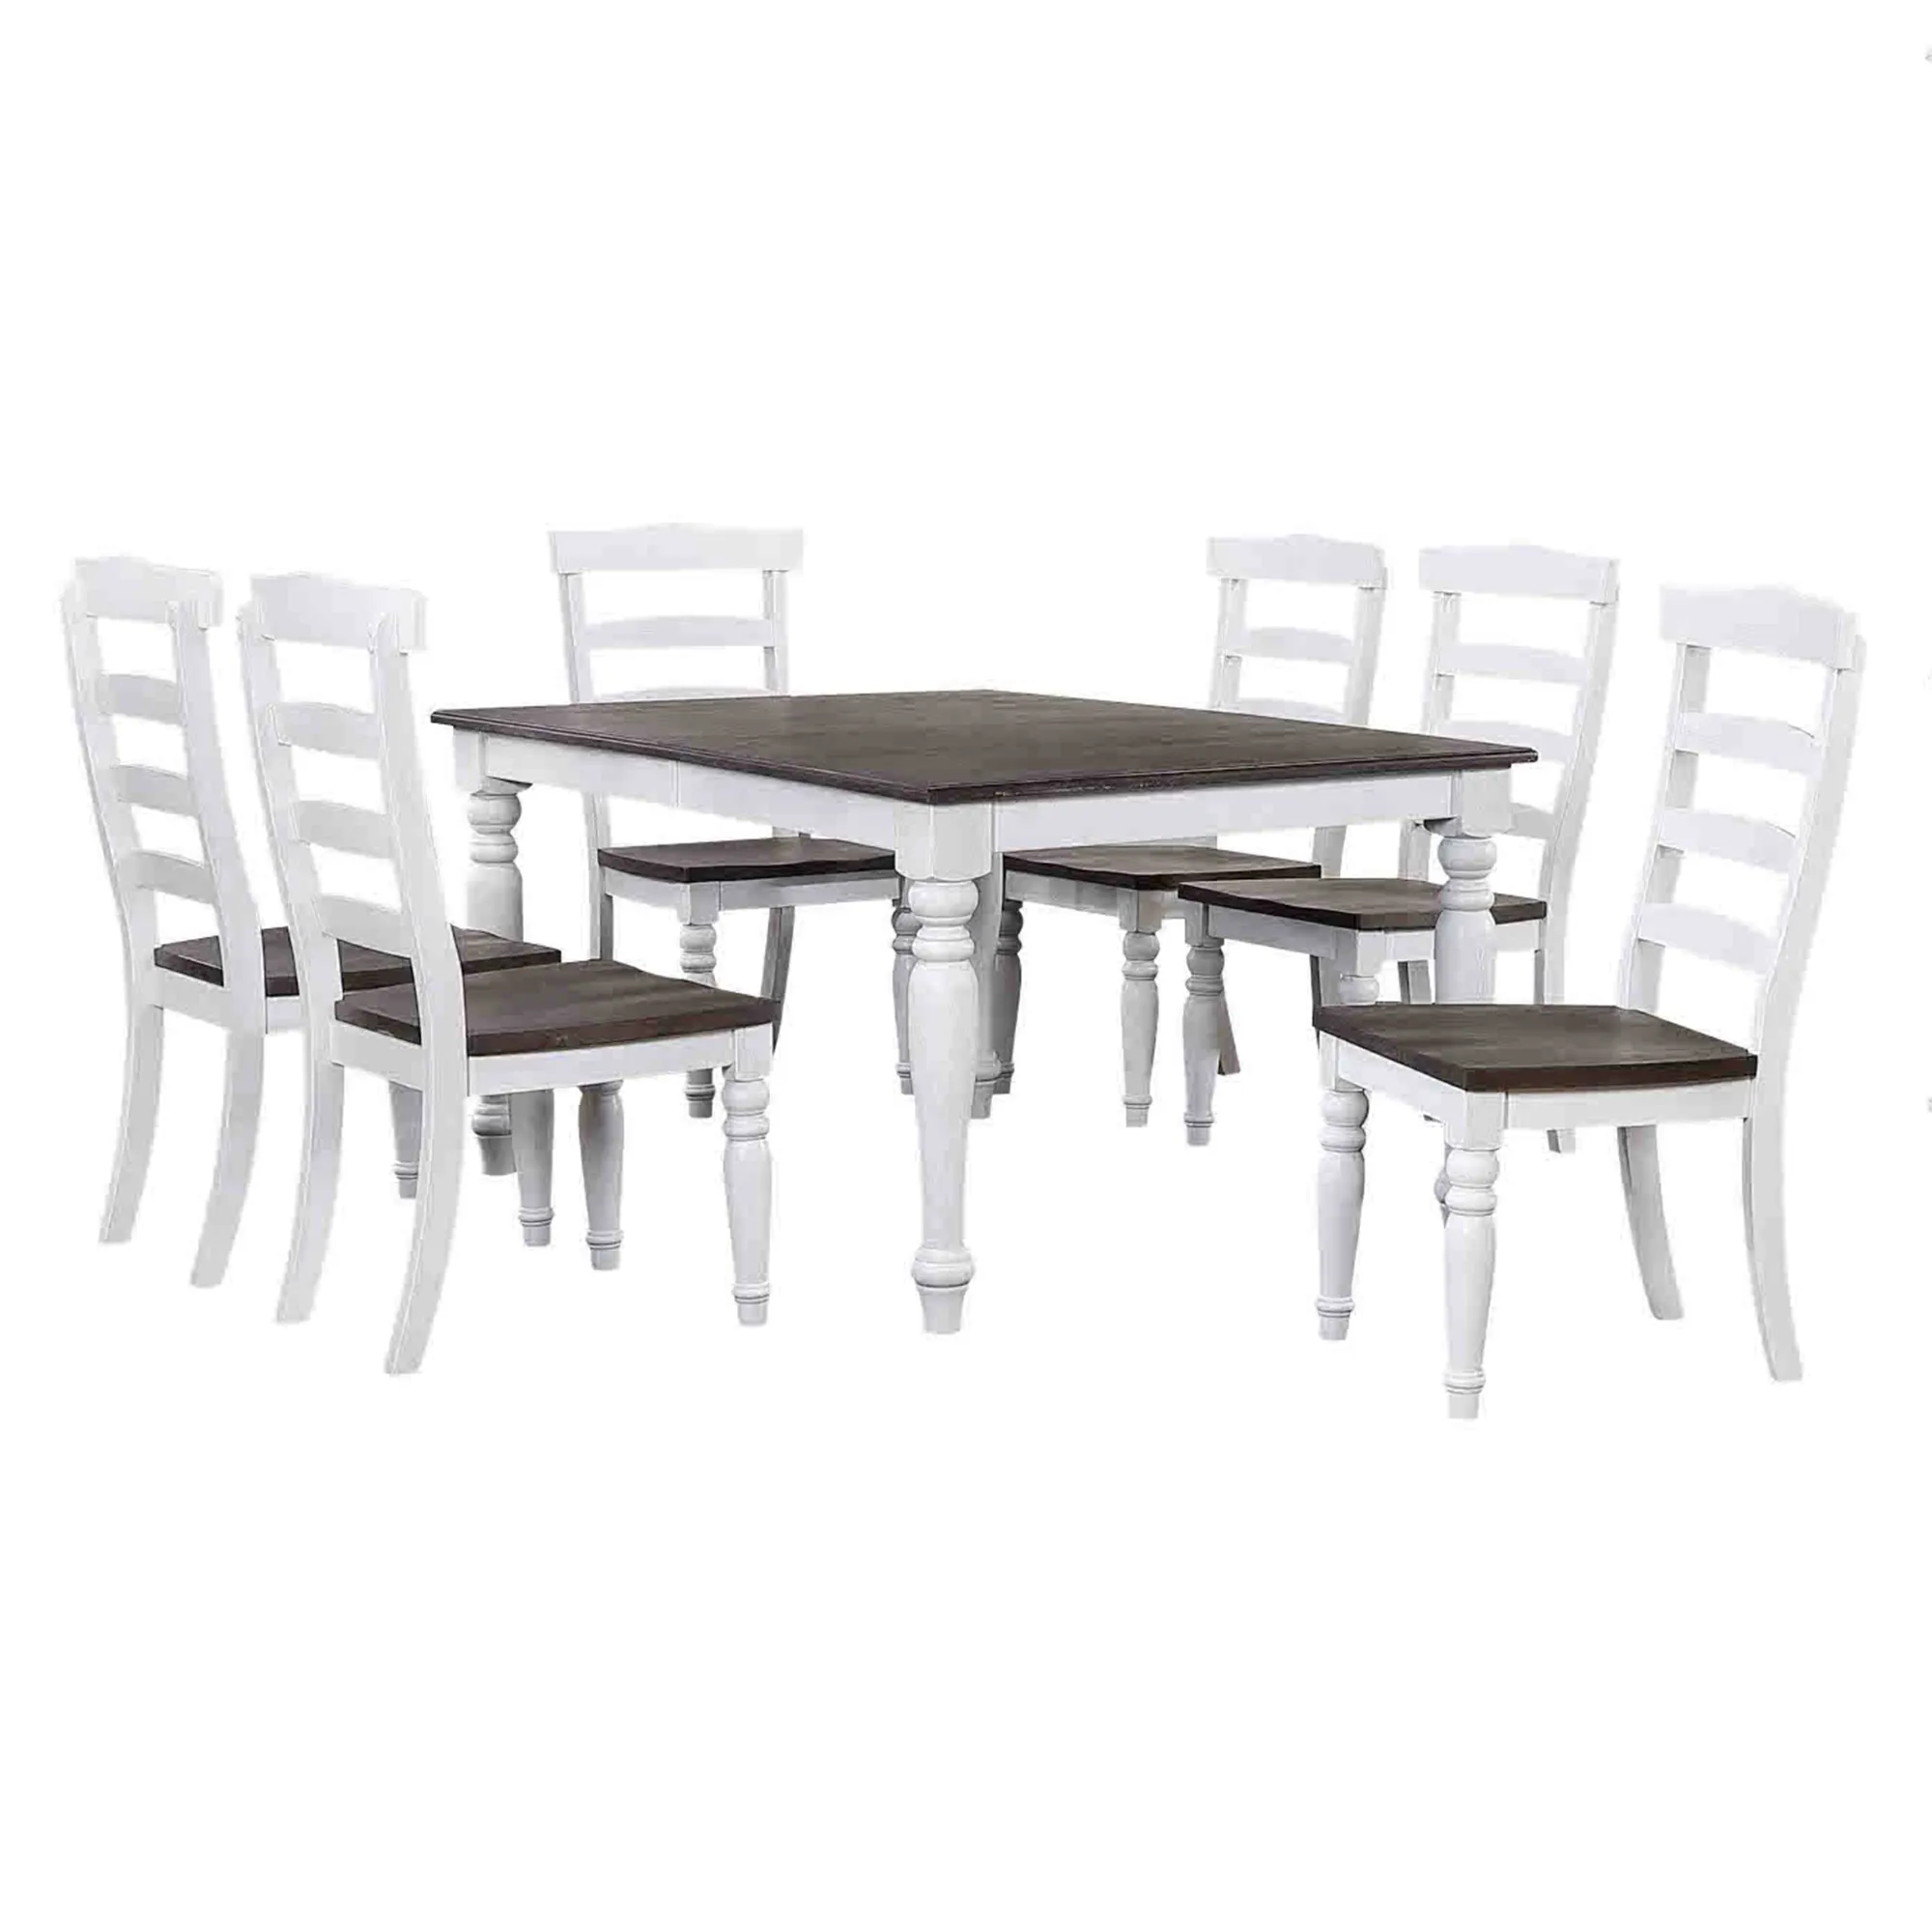 French Country 7 Piece Dining Set (Rectangular Table with 6 Side Chairs)